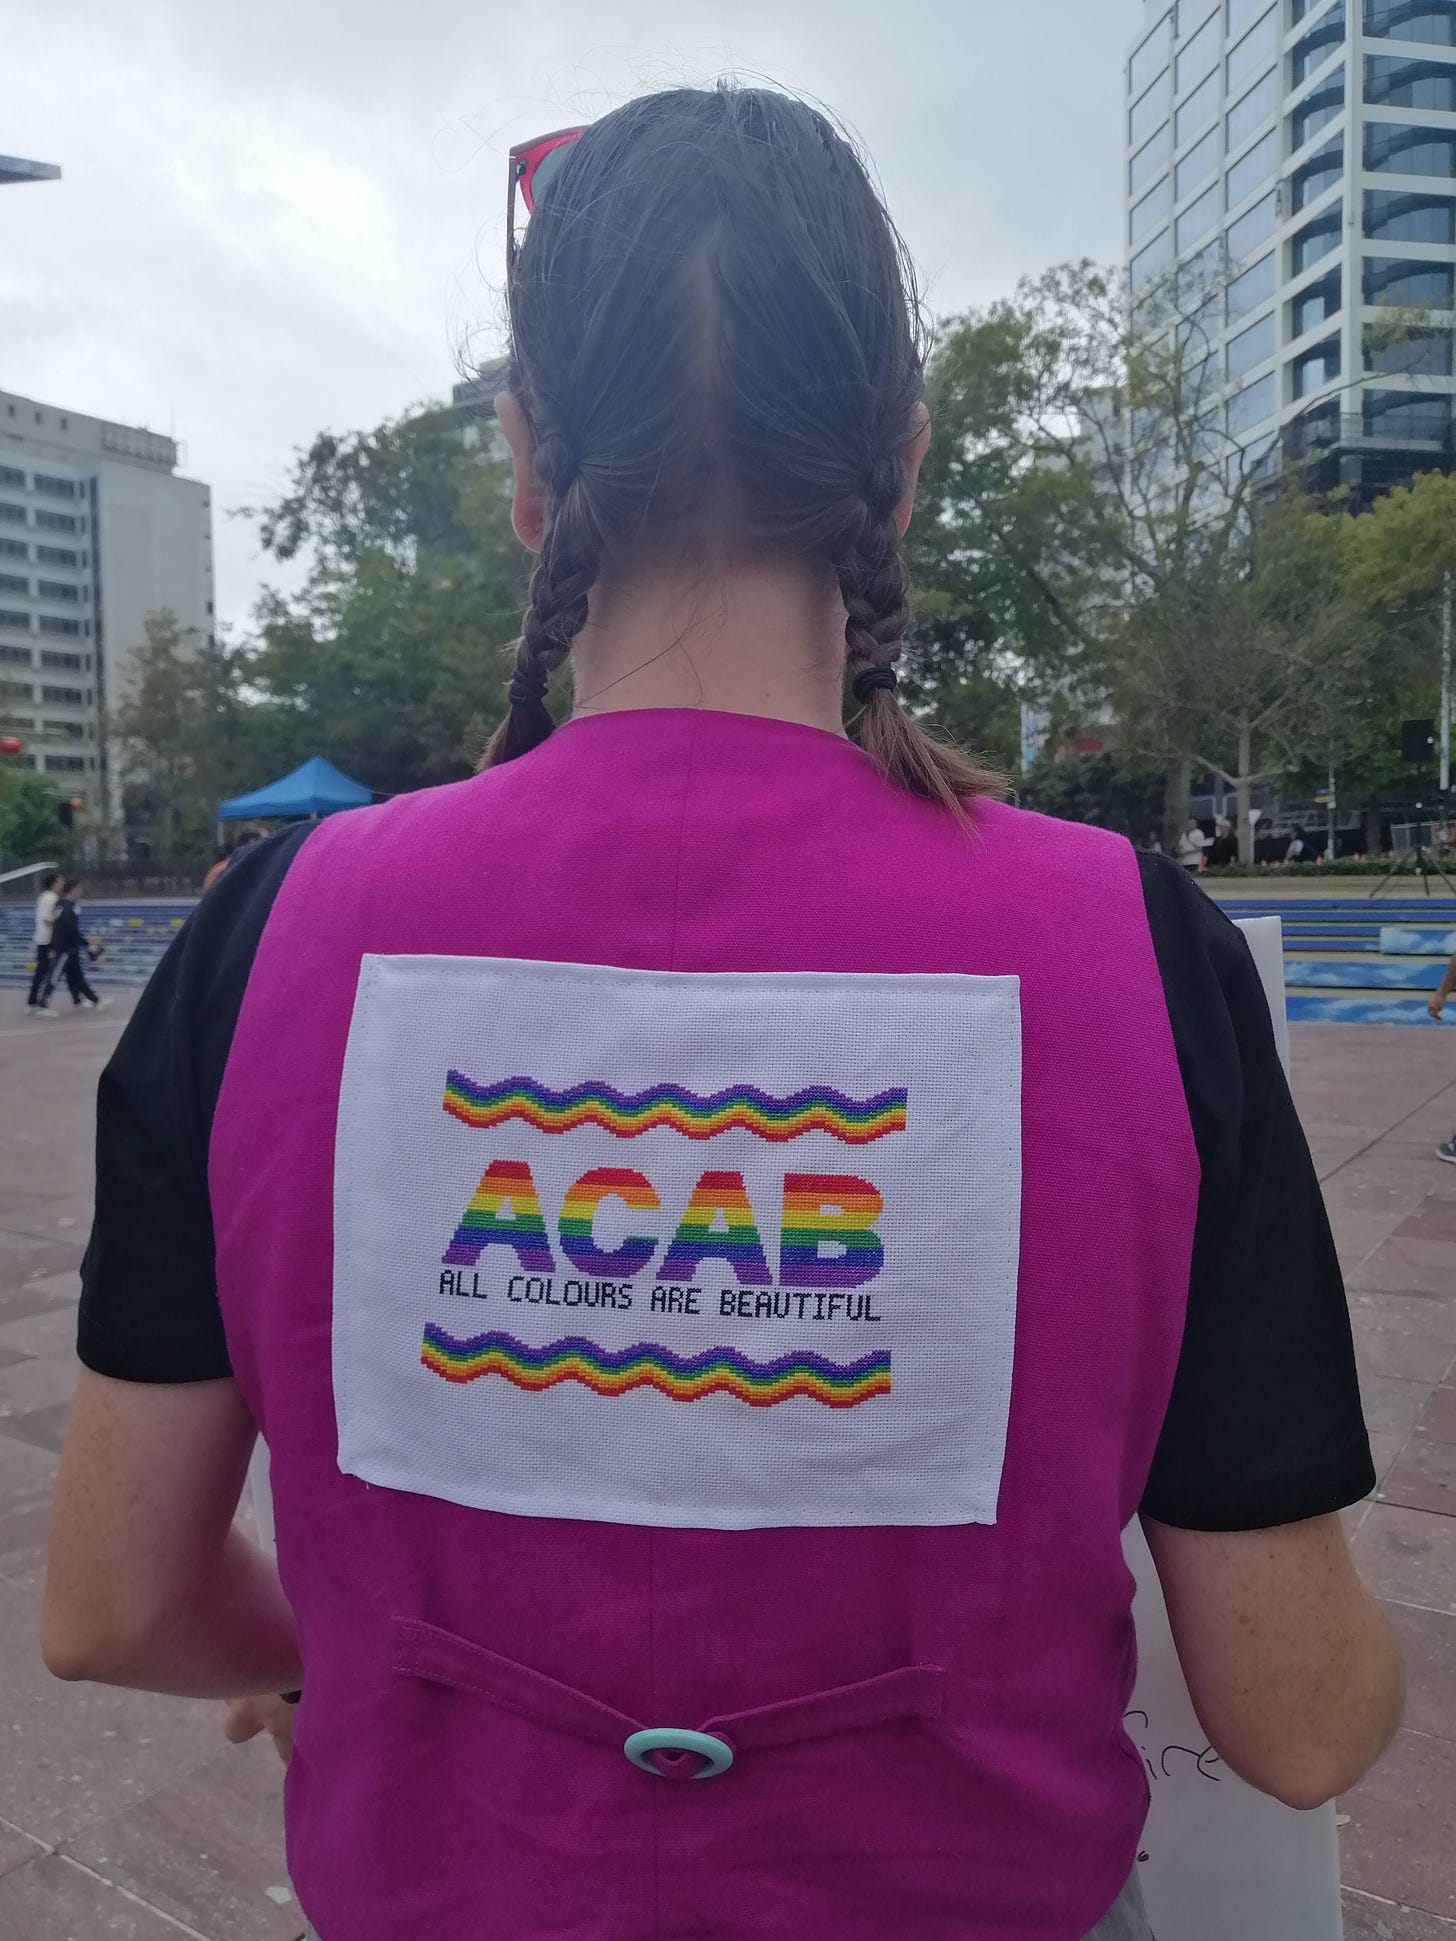 Photo of a white woman with shoulder length brown hair in two plaits wearing a hot pink vest with ACAB stitch on the back